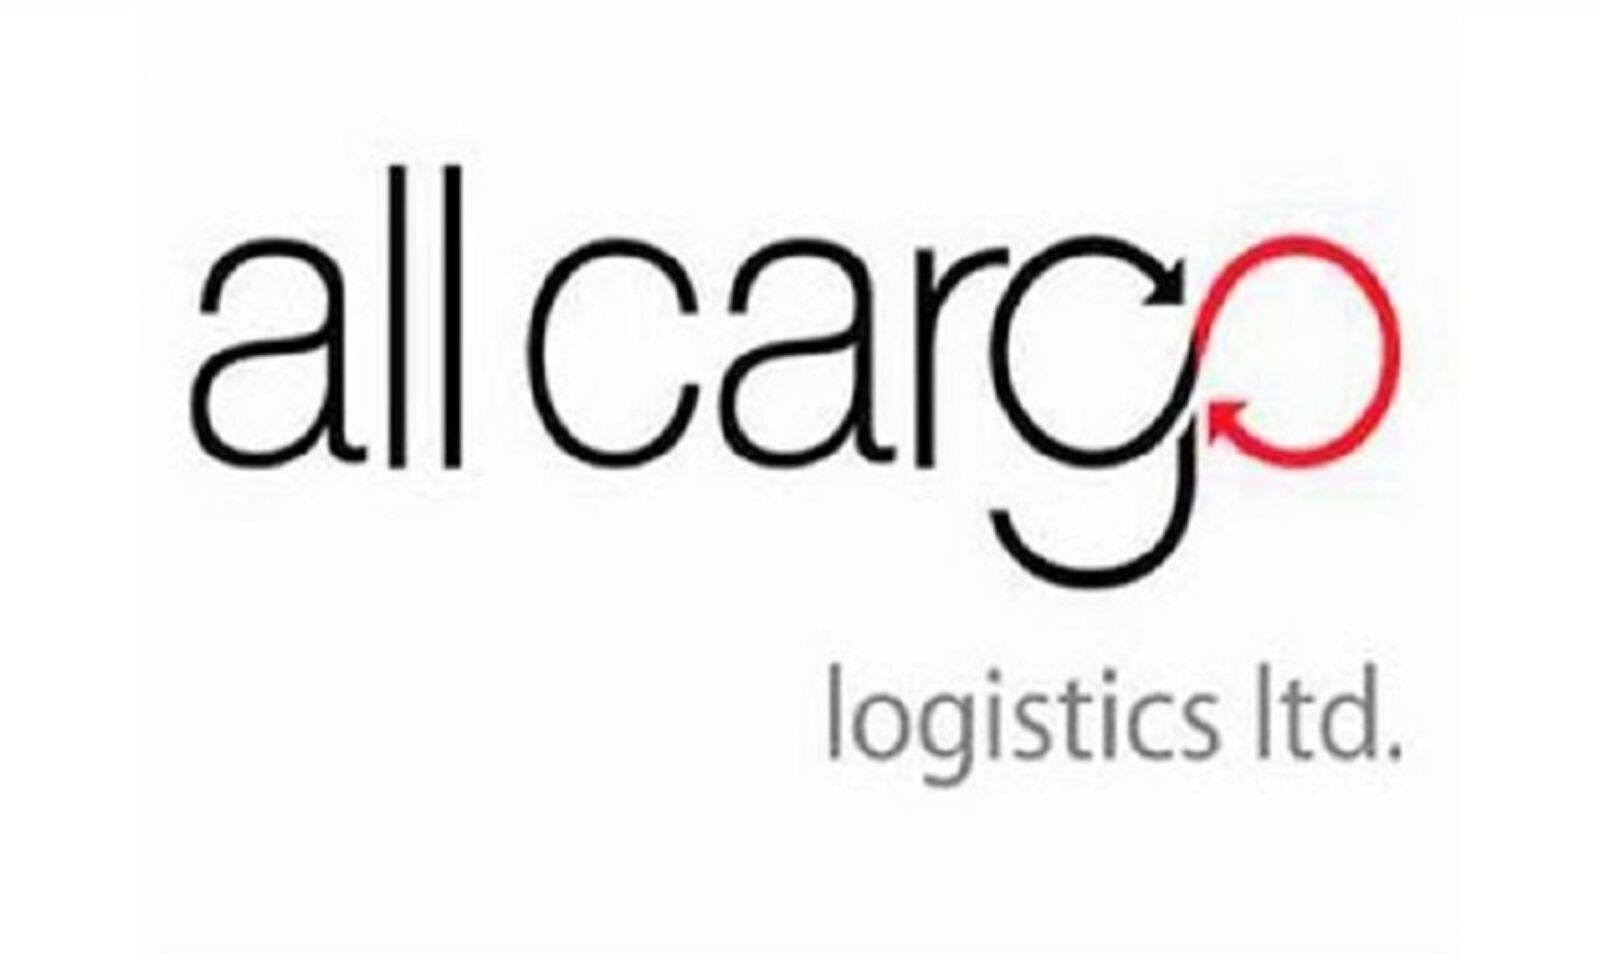 allcargo logistics board approves demerger of cfs/icd & real estate businesses